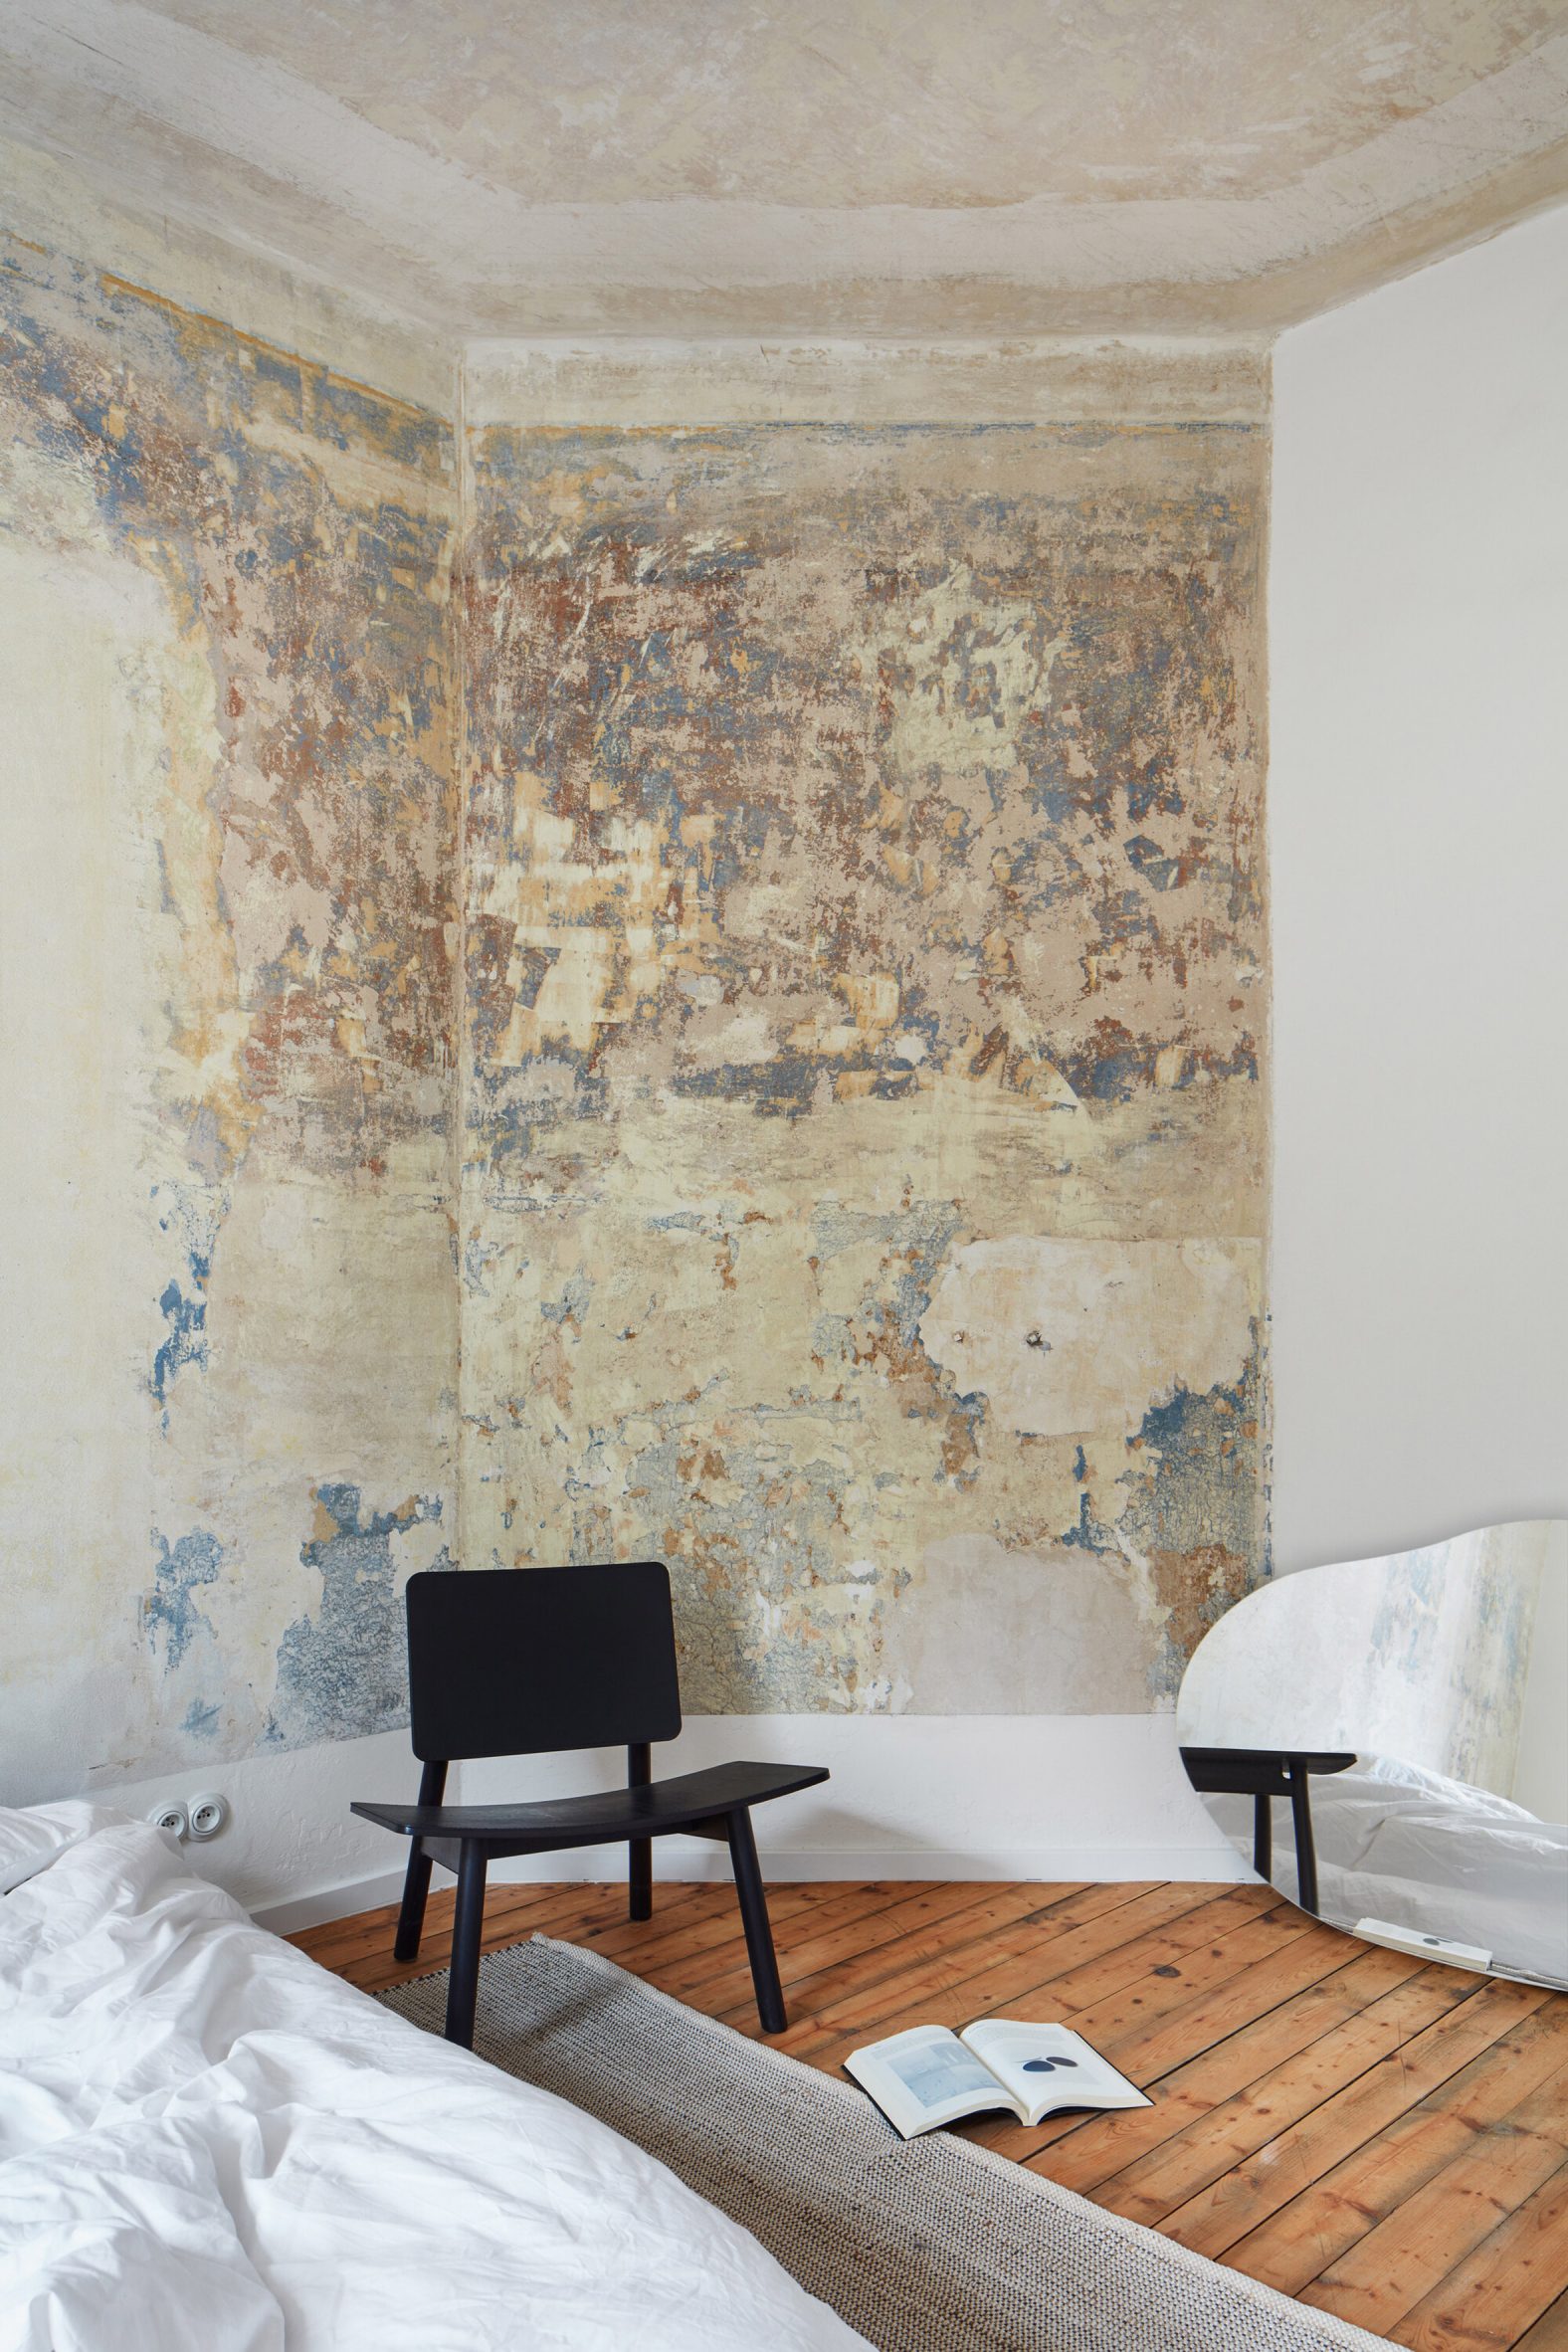 Chair in front of mottled painted wall